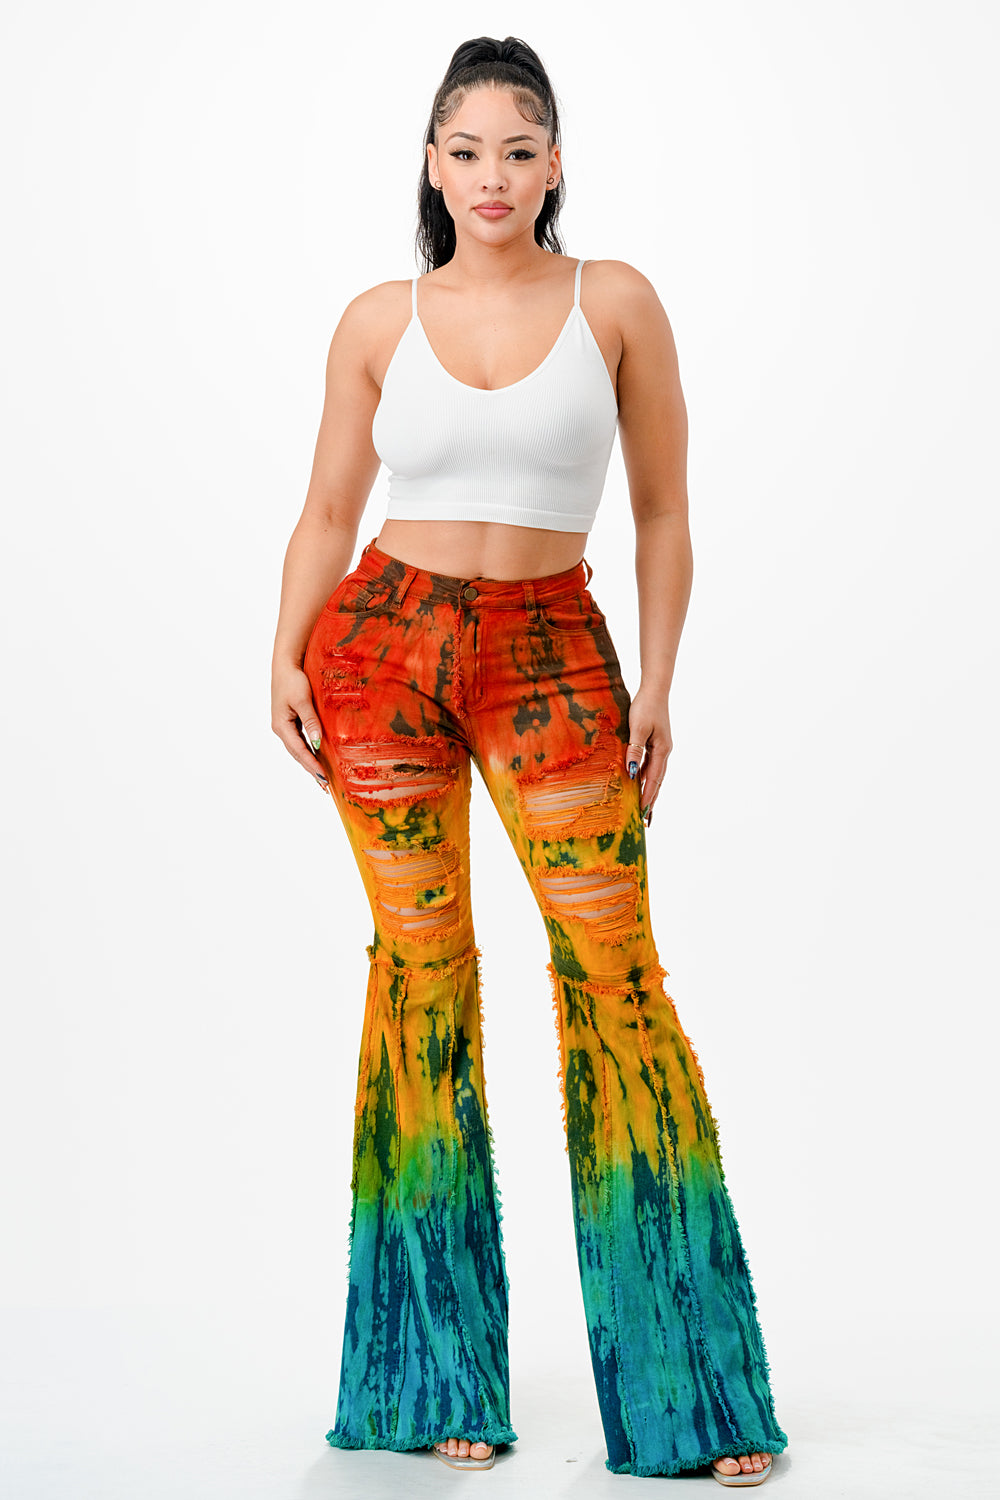 Purple Candy Jeans Women Denim Pants Tie Dye Flare Jeans High Rise Stretch Frayed (Orange Turquois)